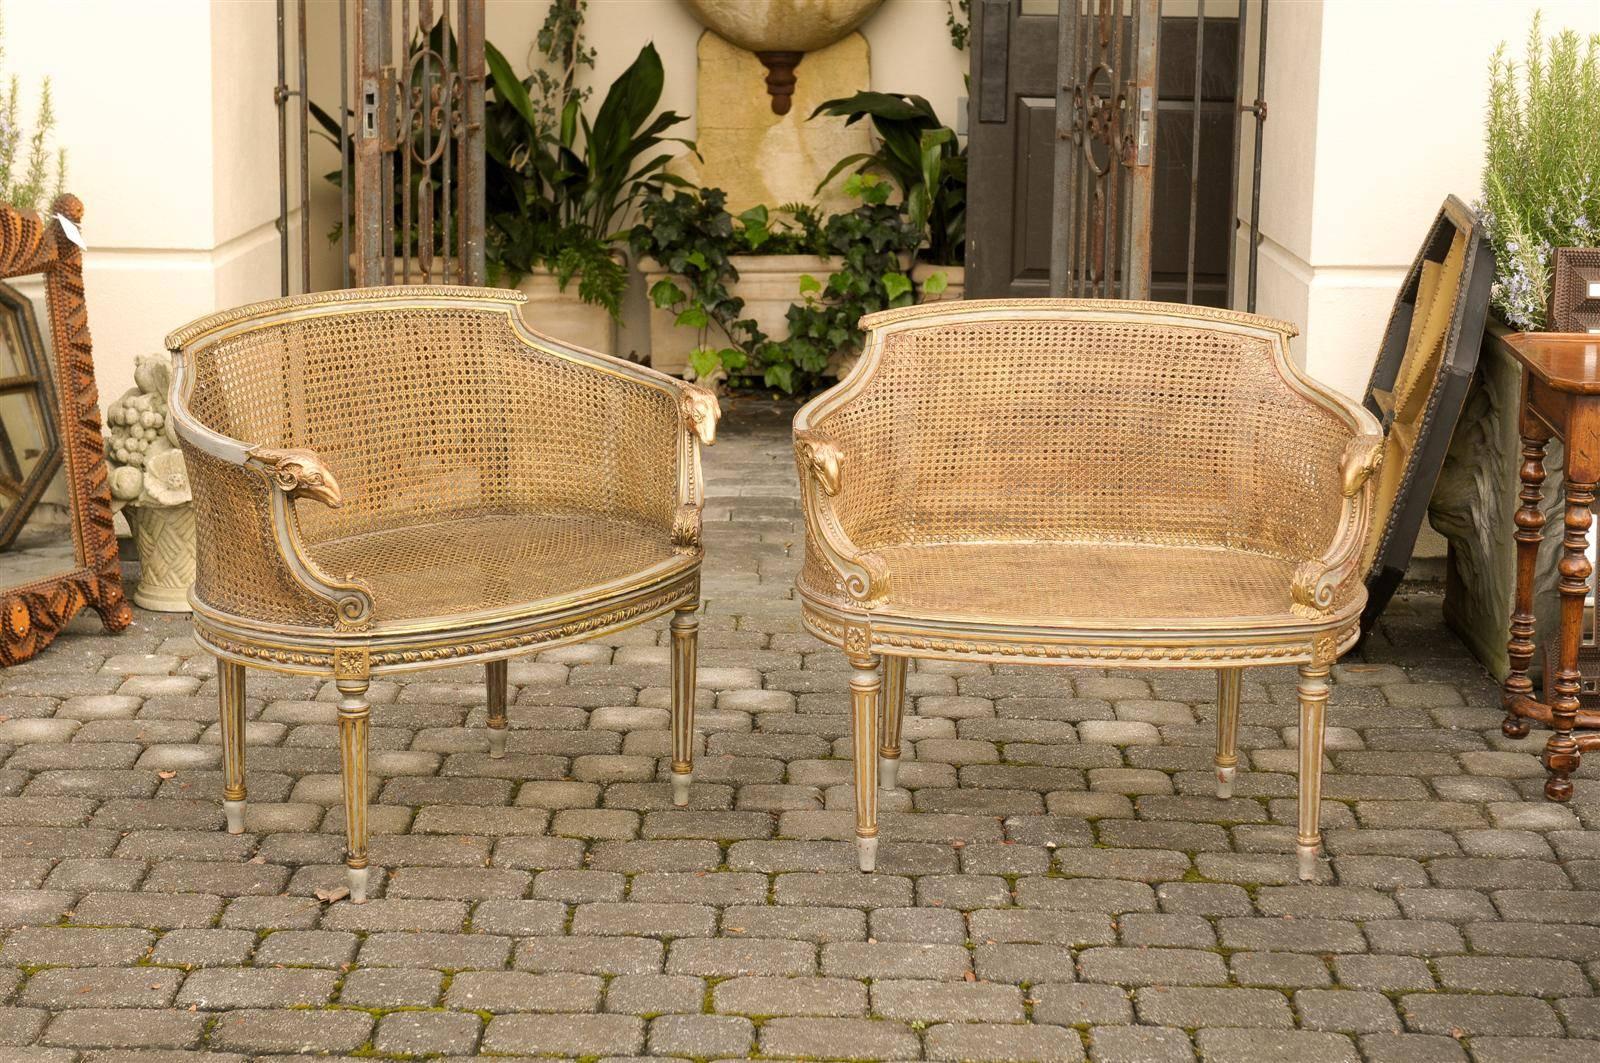 This pair of French Louis XVI style barrel-back chairs features exquisite cane backs and seats. The curved backs provide great support for the sitter to rest comfortably. The arms are beautifully adorned with carved rams heads and Baroque style